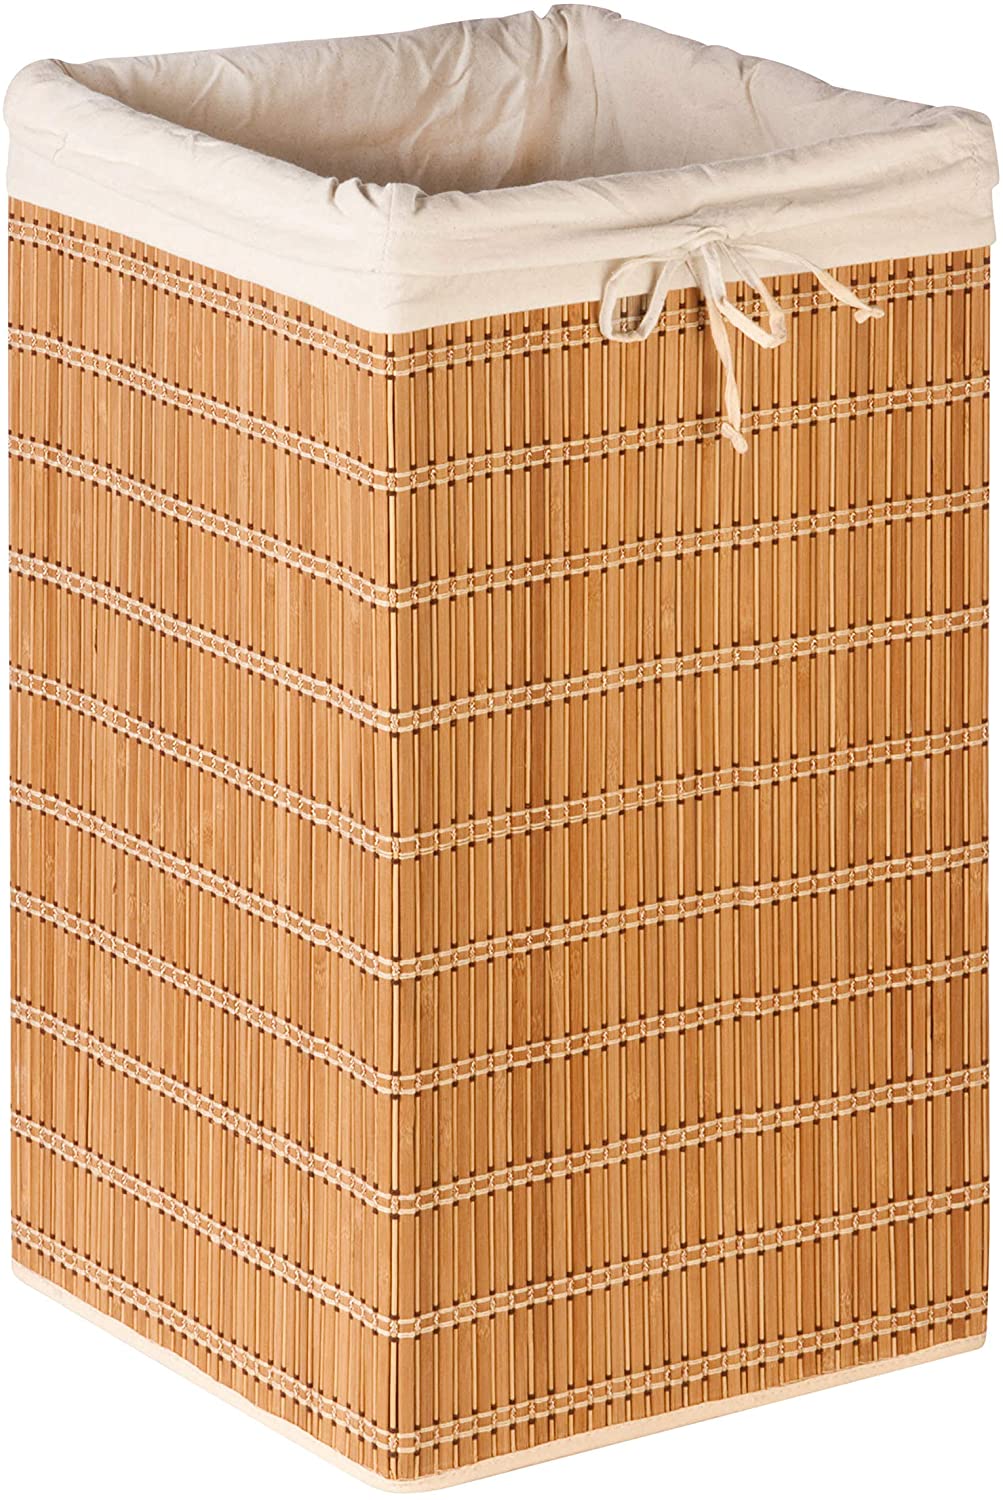 Honey-Can-Do HMP-01620 Square Wicker Hamper, Natural Bamboo/Beige Canvas, 25-Inches Tall, EC1101